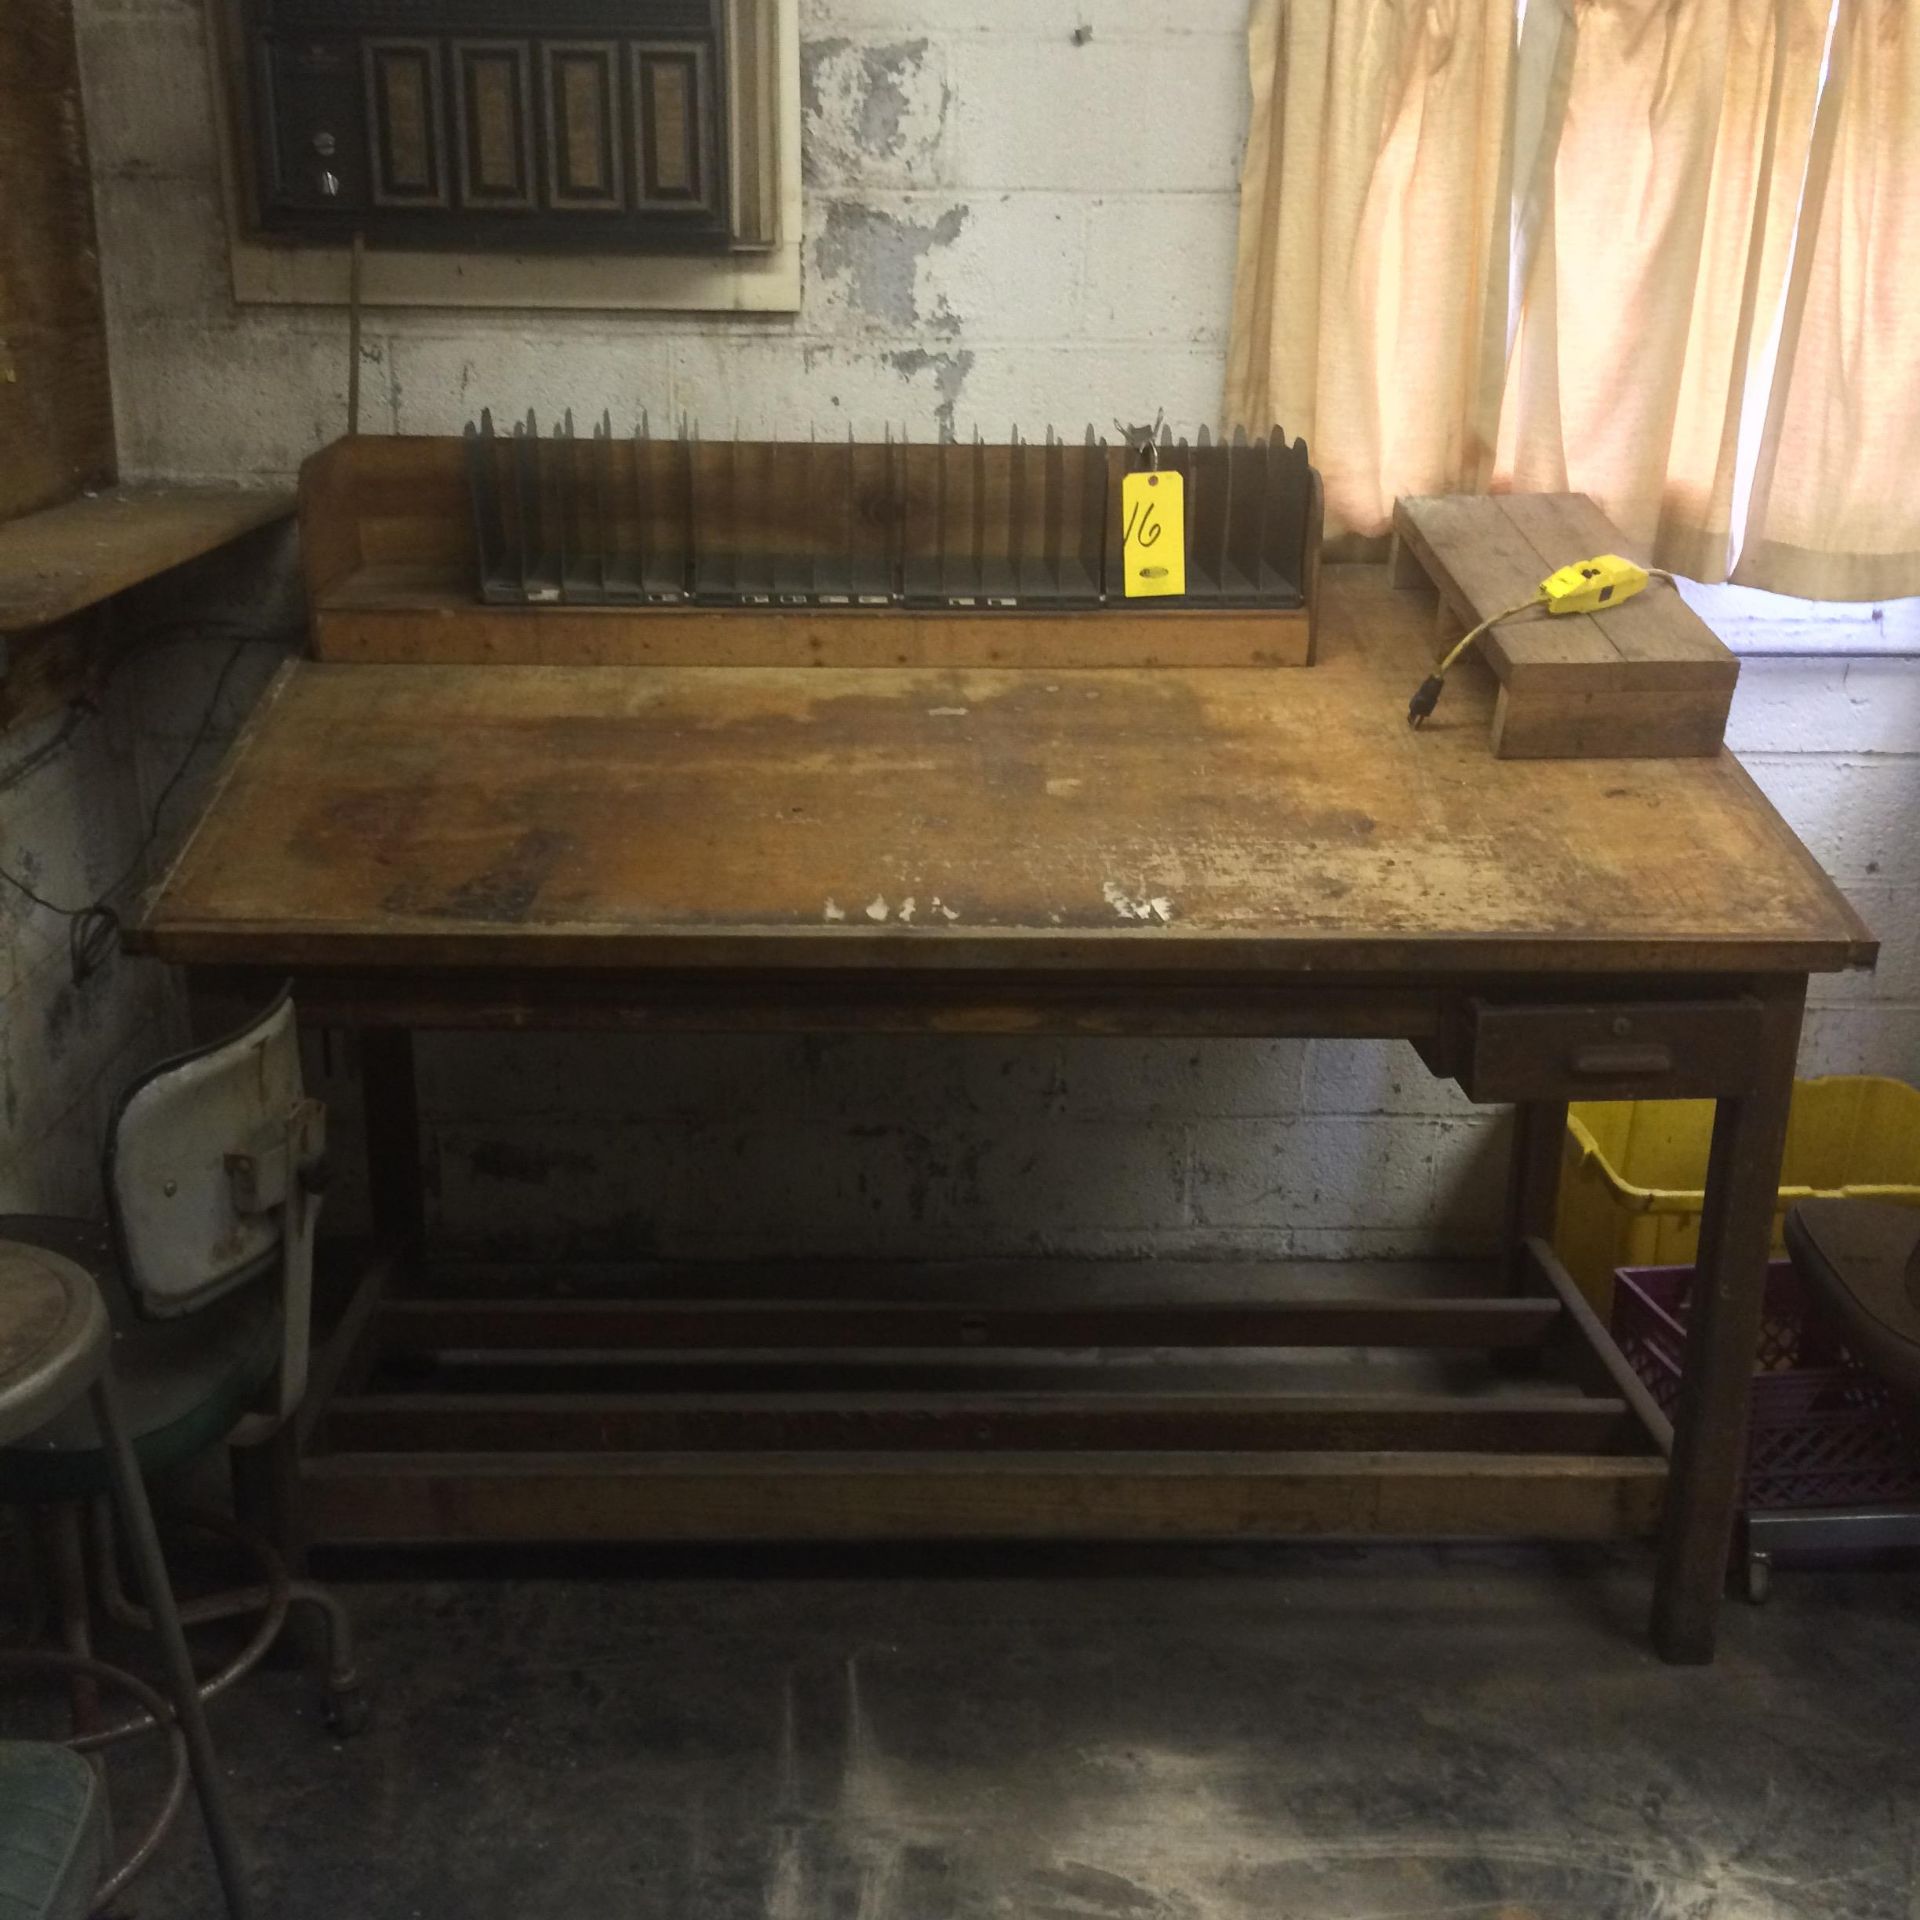 (2) DRAFTING TABLES